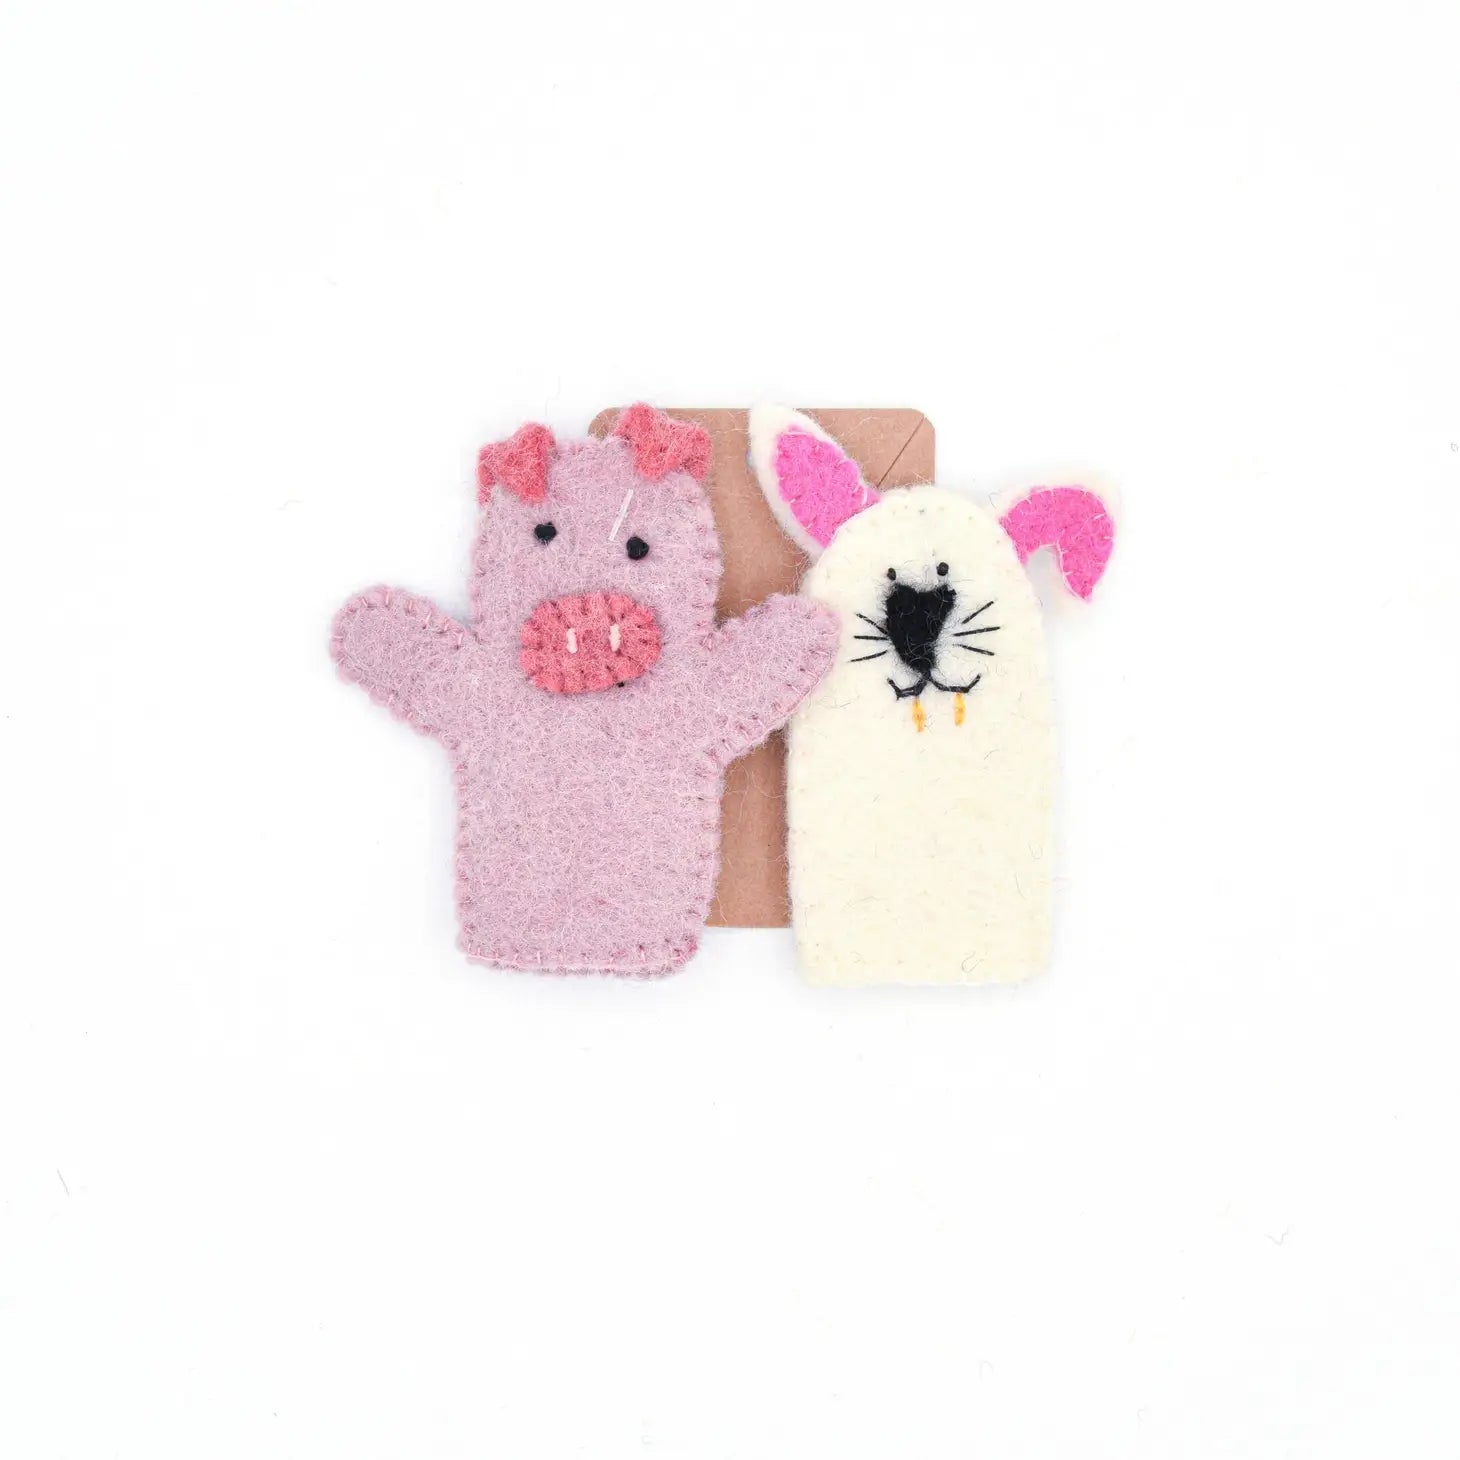 Pig and bunny puppet set